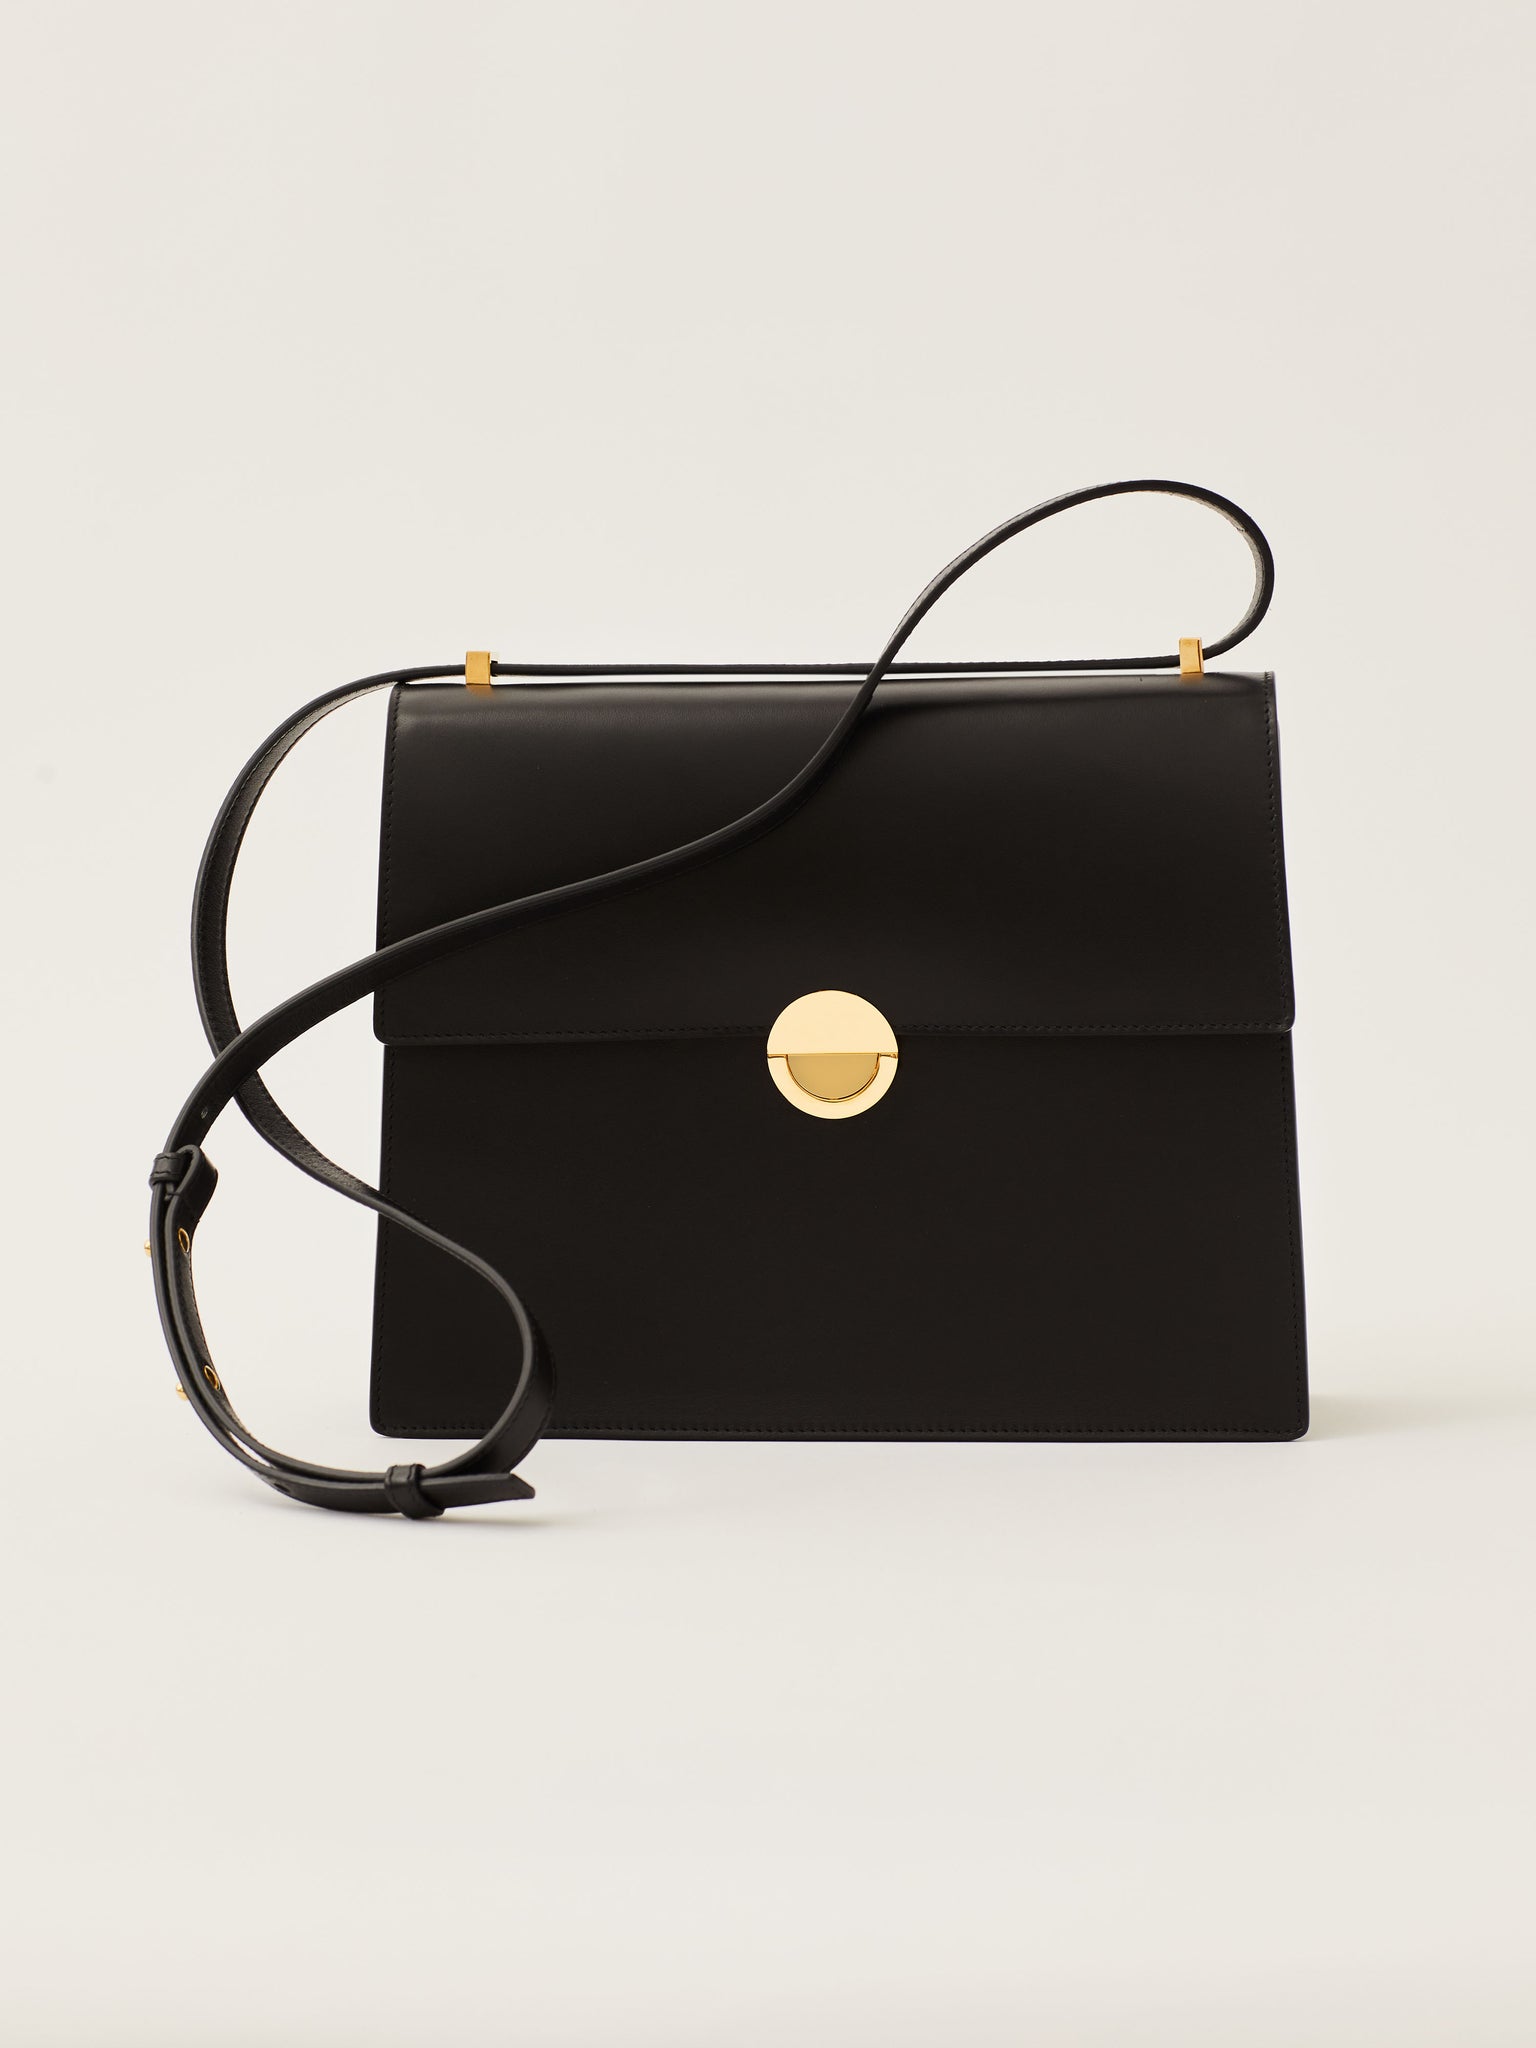 Objets Daso Hye Handbag in Black Leather: Front View with Shoulder Strap On Top